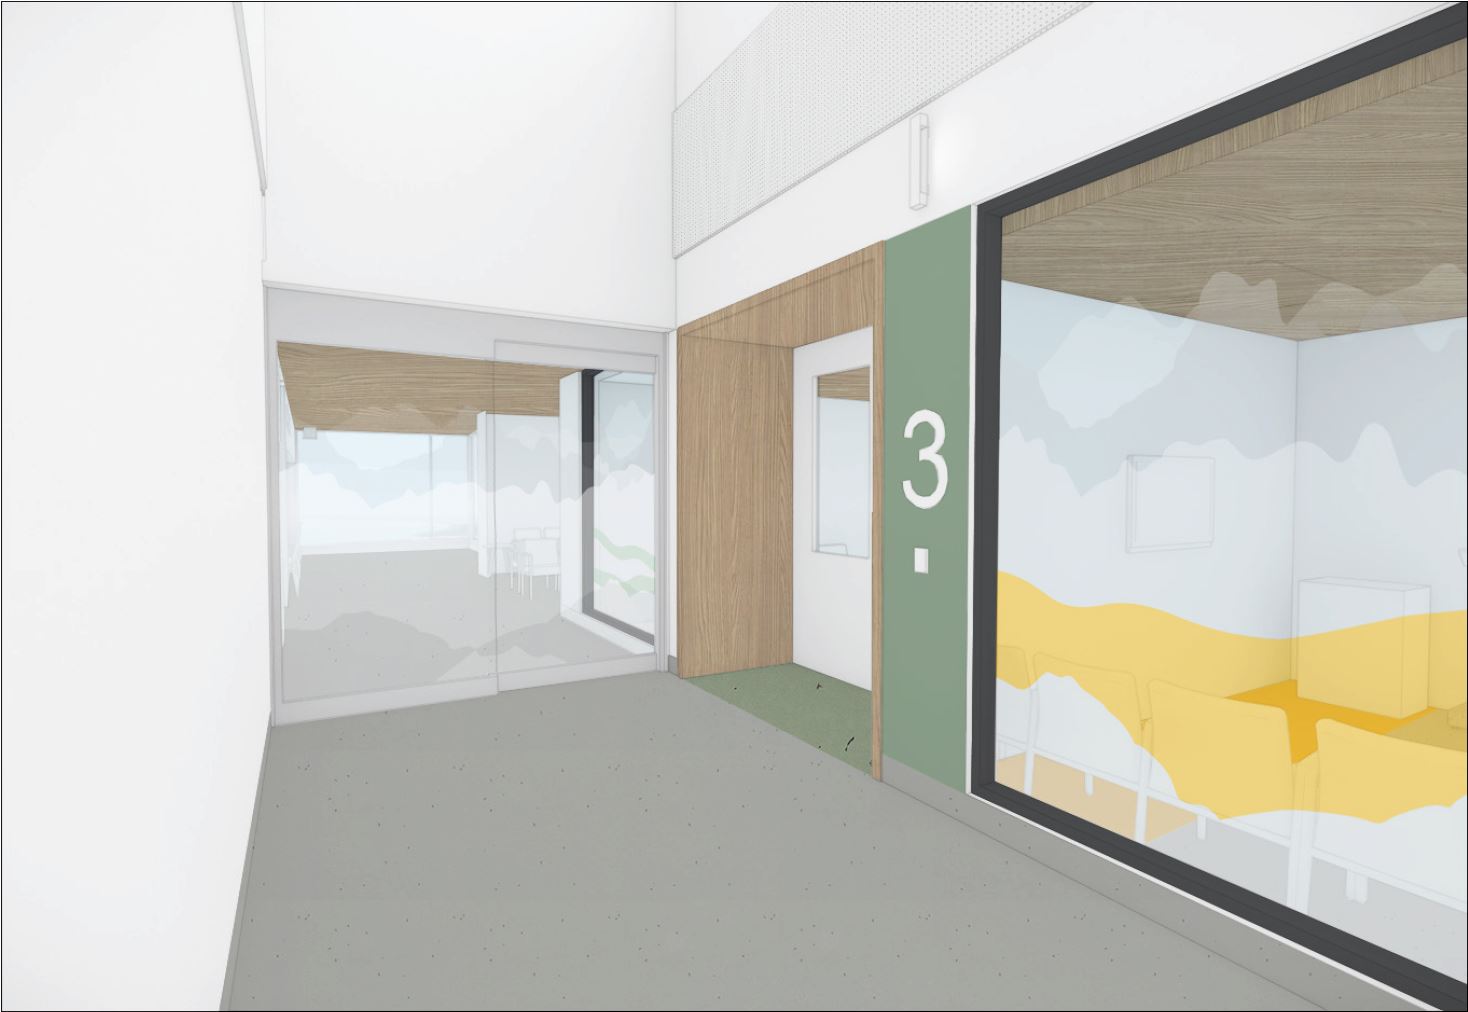 Concept rendering of the entrance to Zone Three in the new emergency department. Designs may be subject to change.